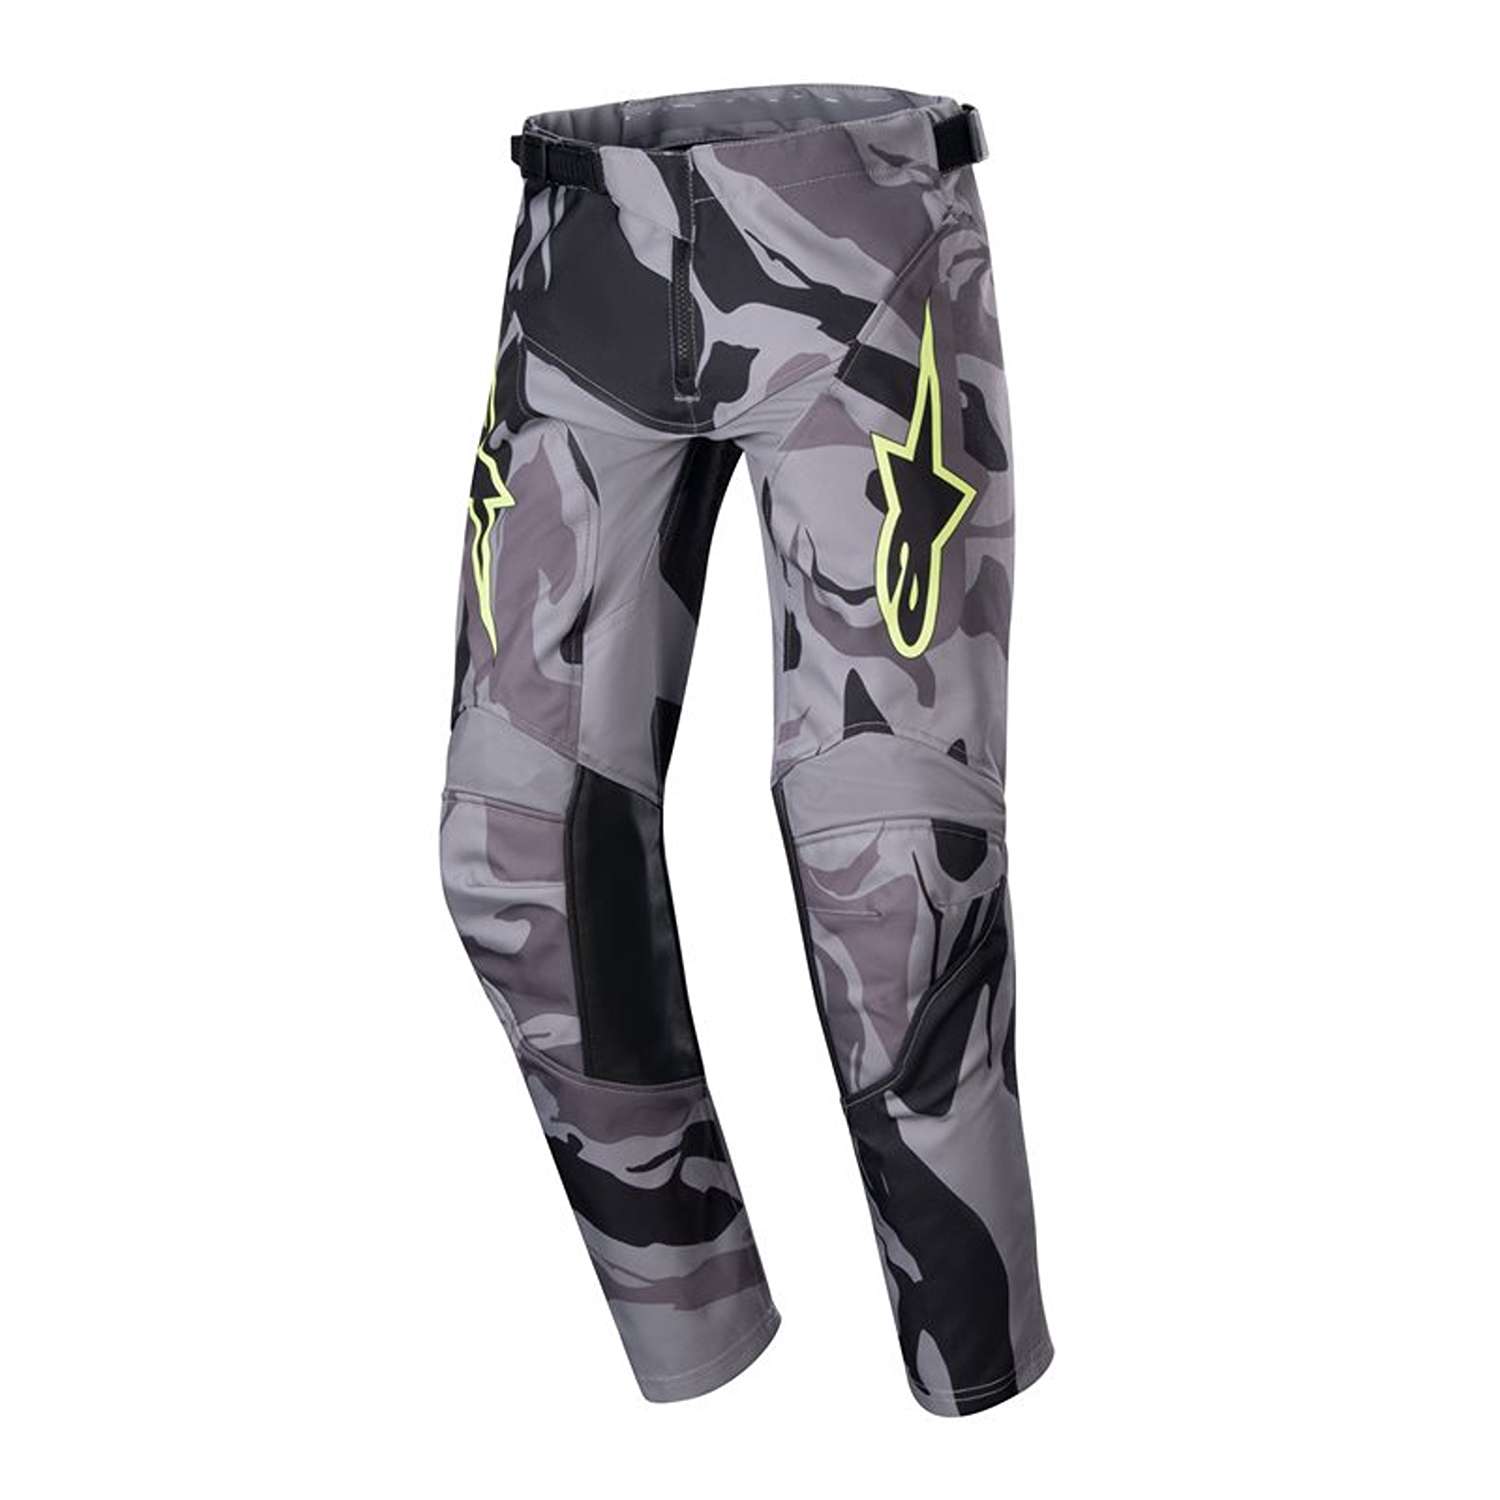 Image of Alpinestars Youth Racer Tactical Pants Cast Gray Camo Magnet Size 28 ID 8059347267418